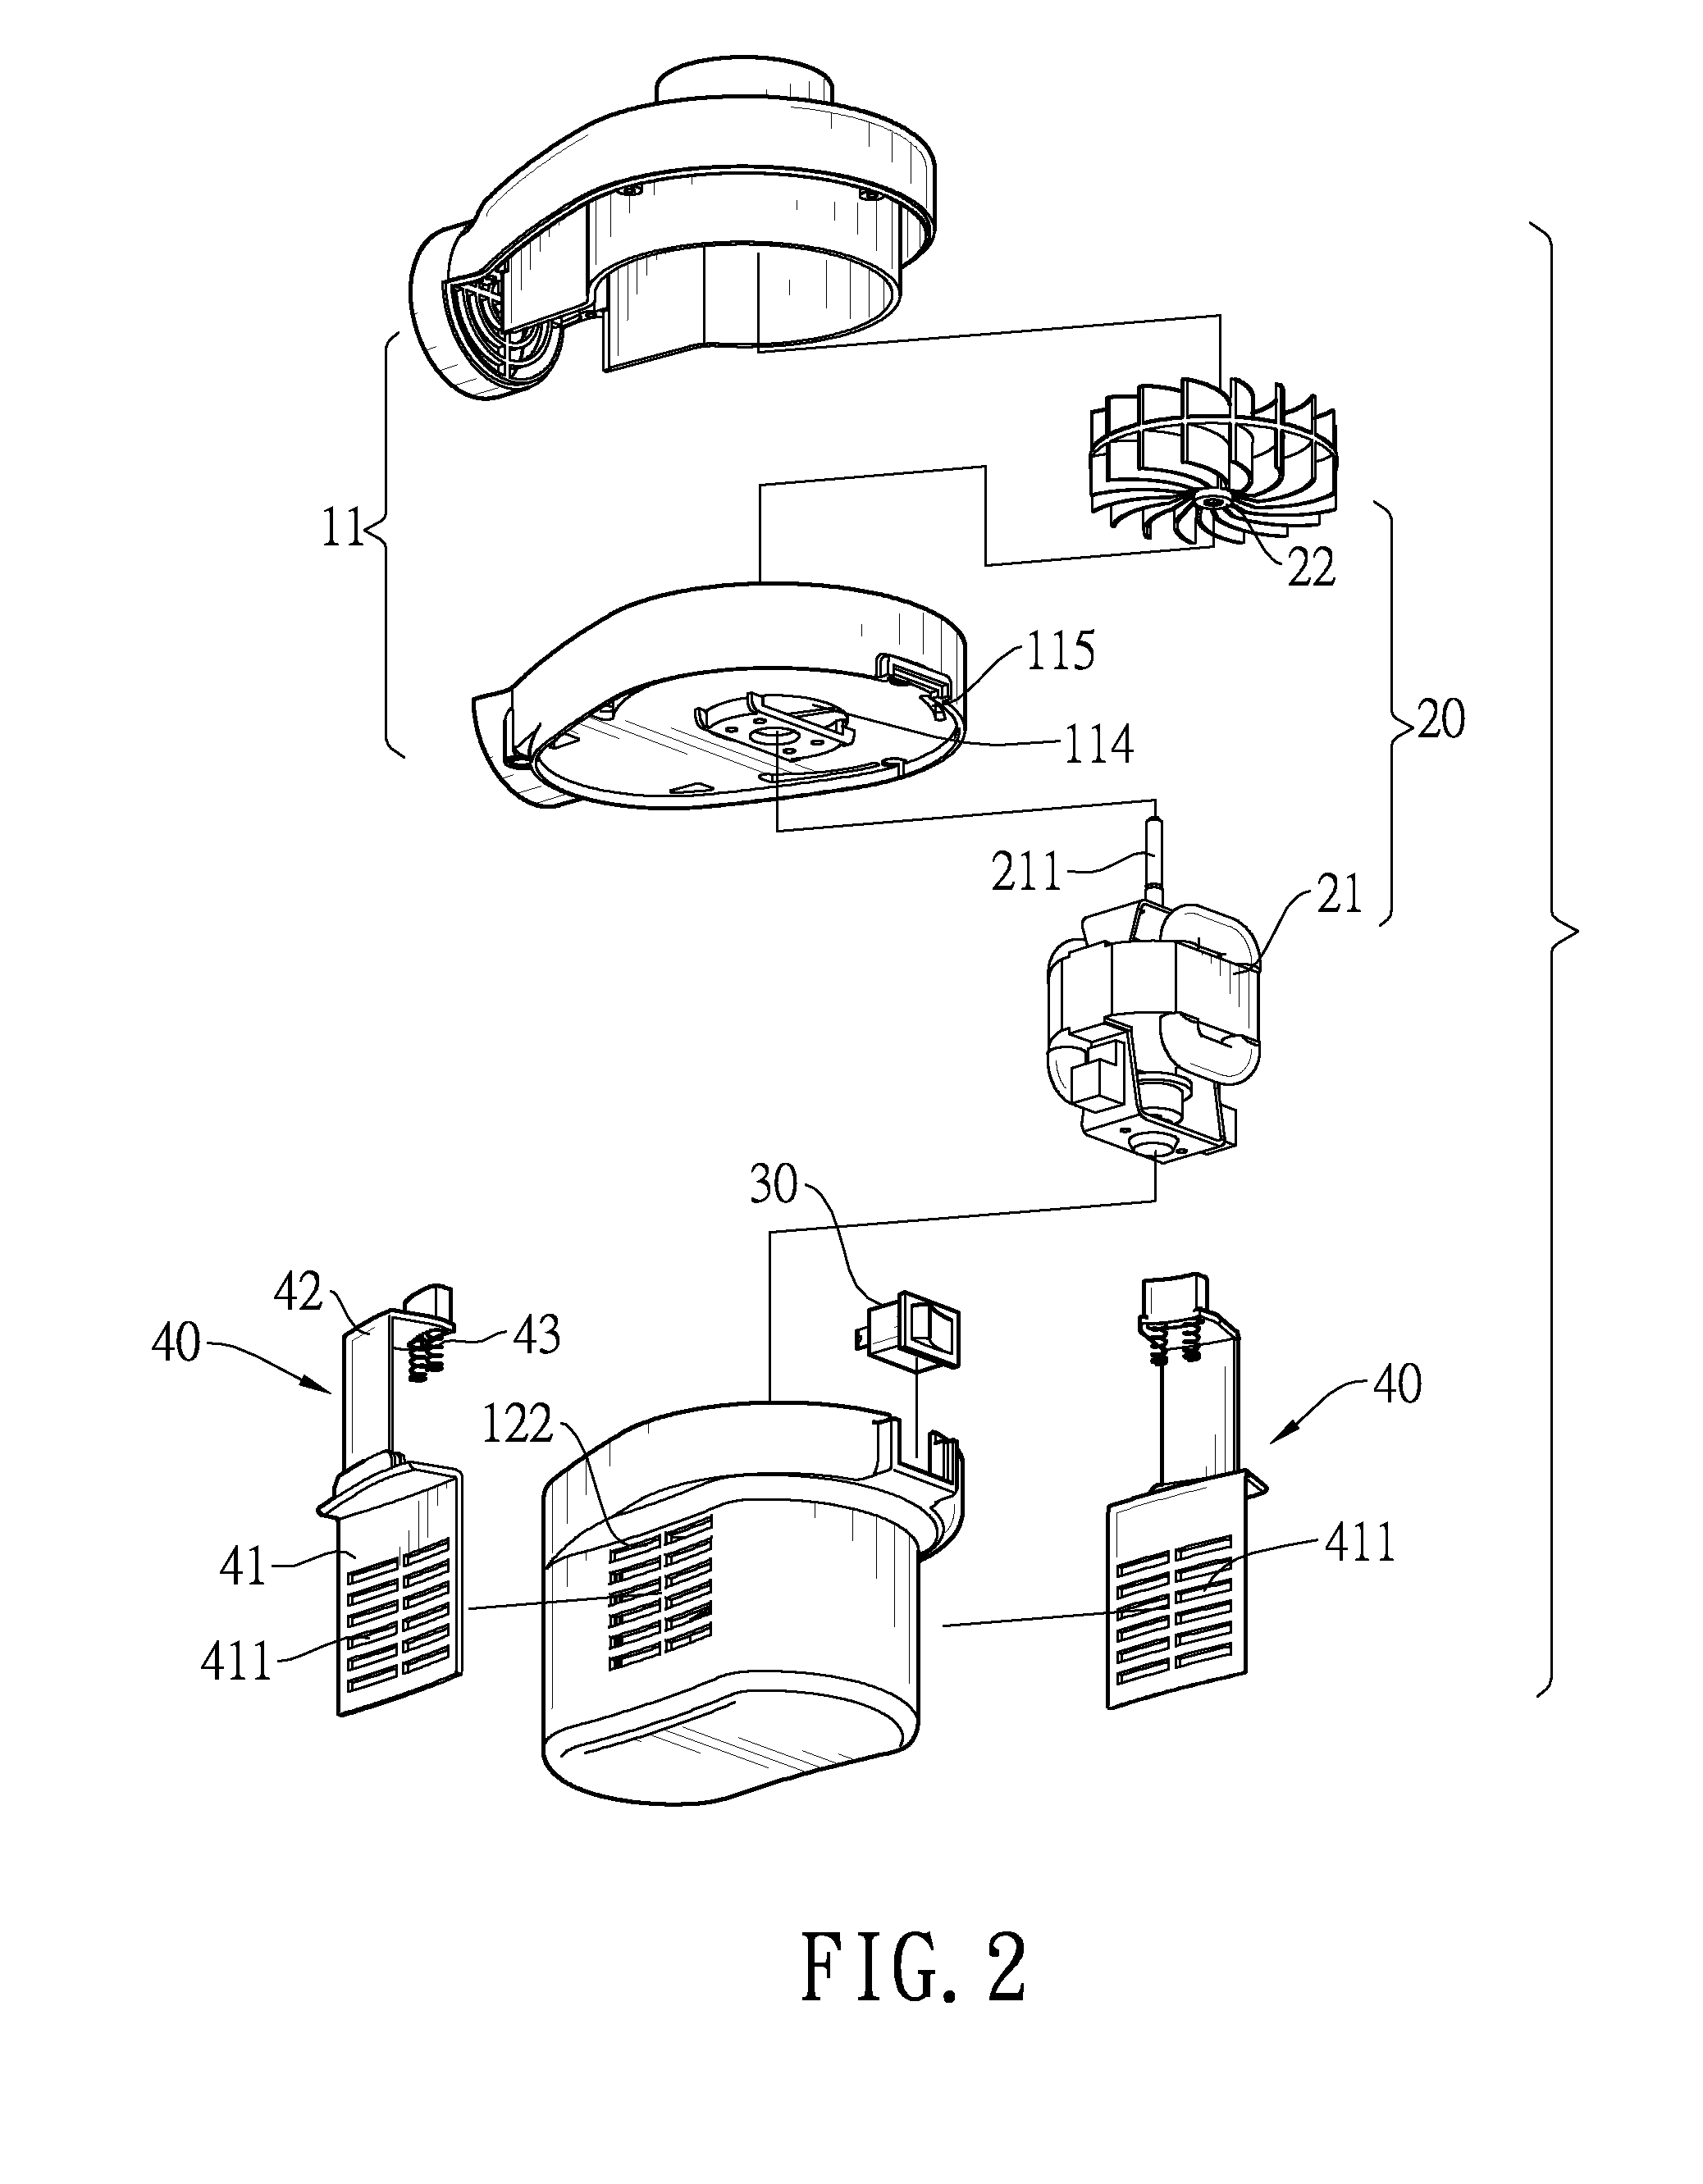 Air pump having an impeller with double-sided blades